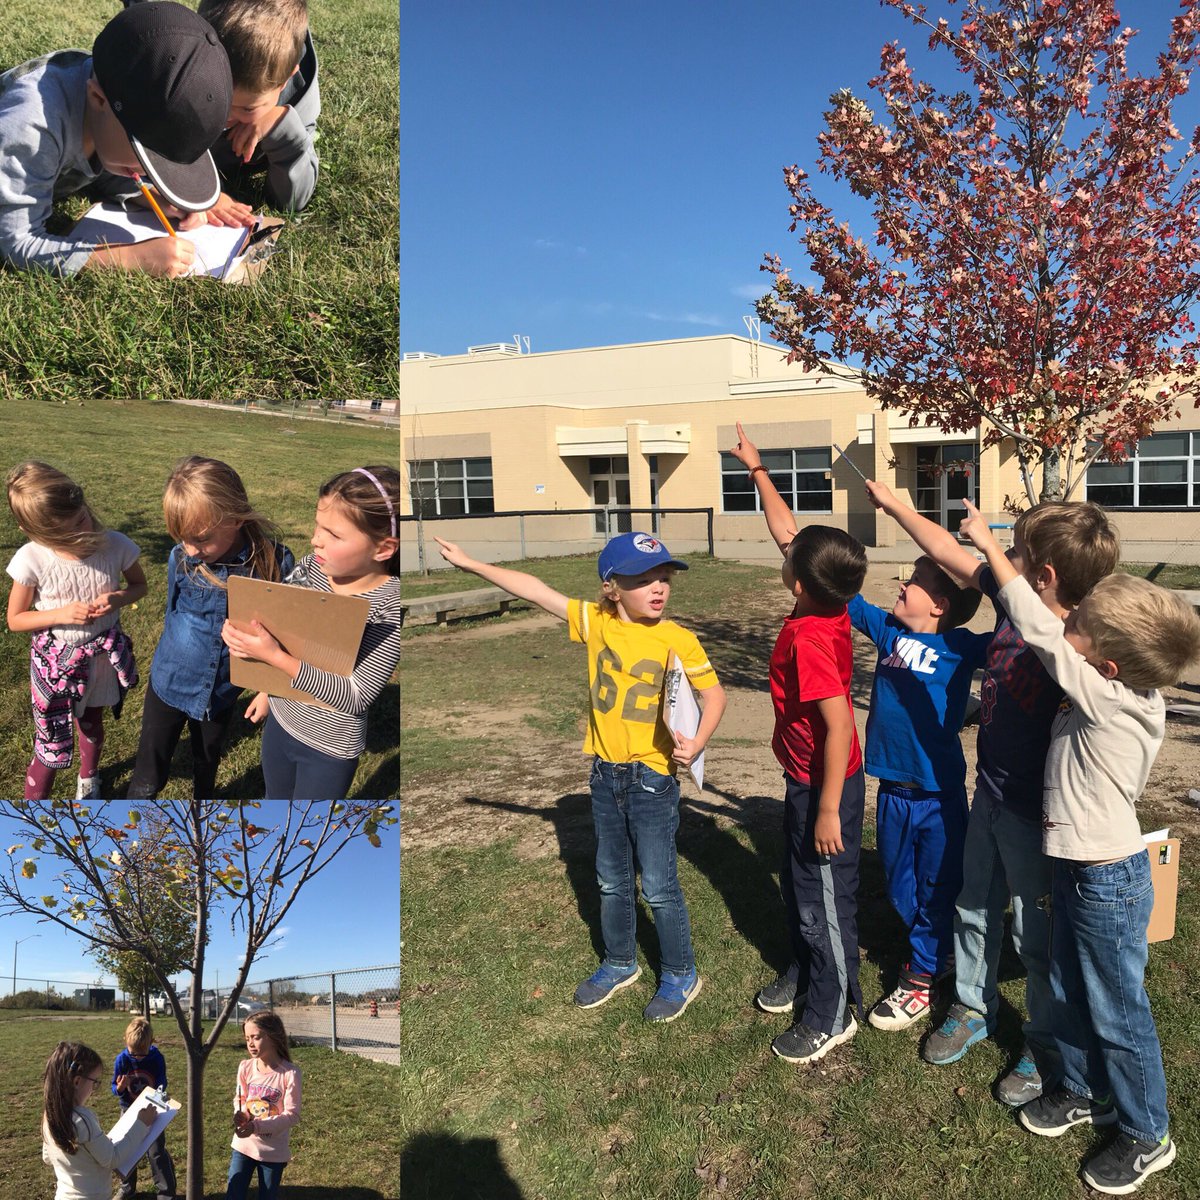 Experiencing fall with our 5 senses. #livingthings #outdoored #leaves #birds #temperature #seasonalchanges